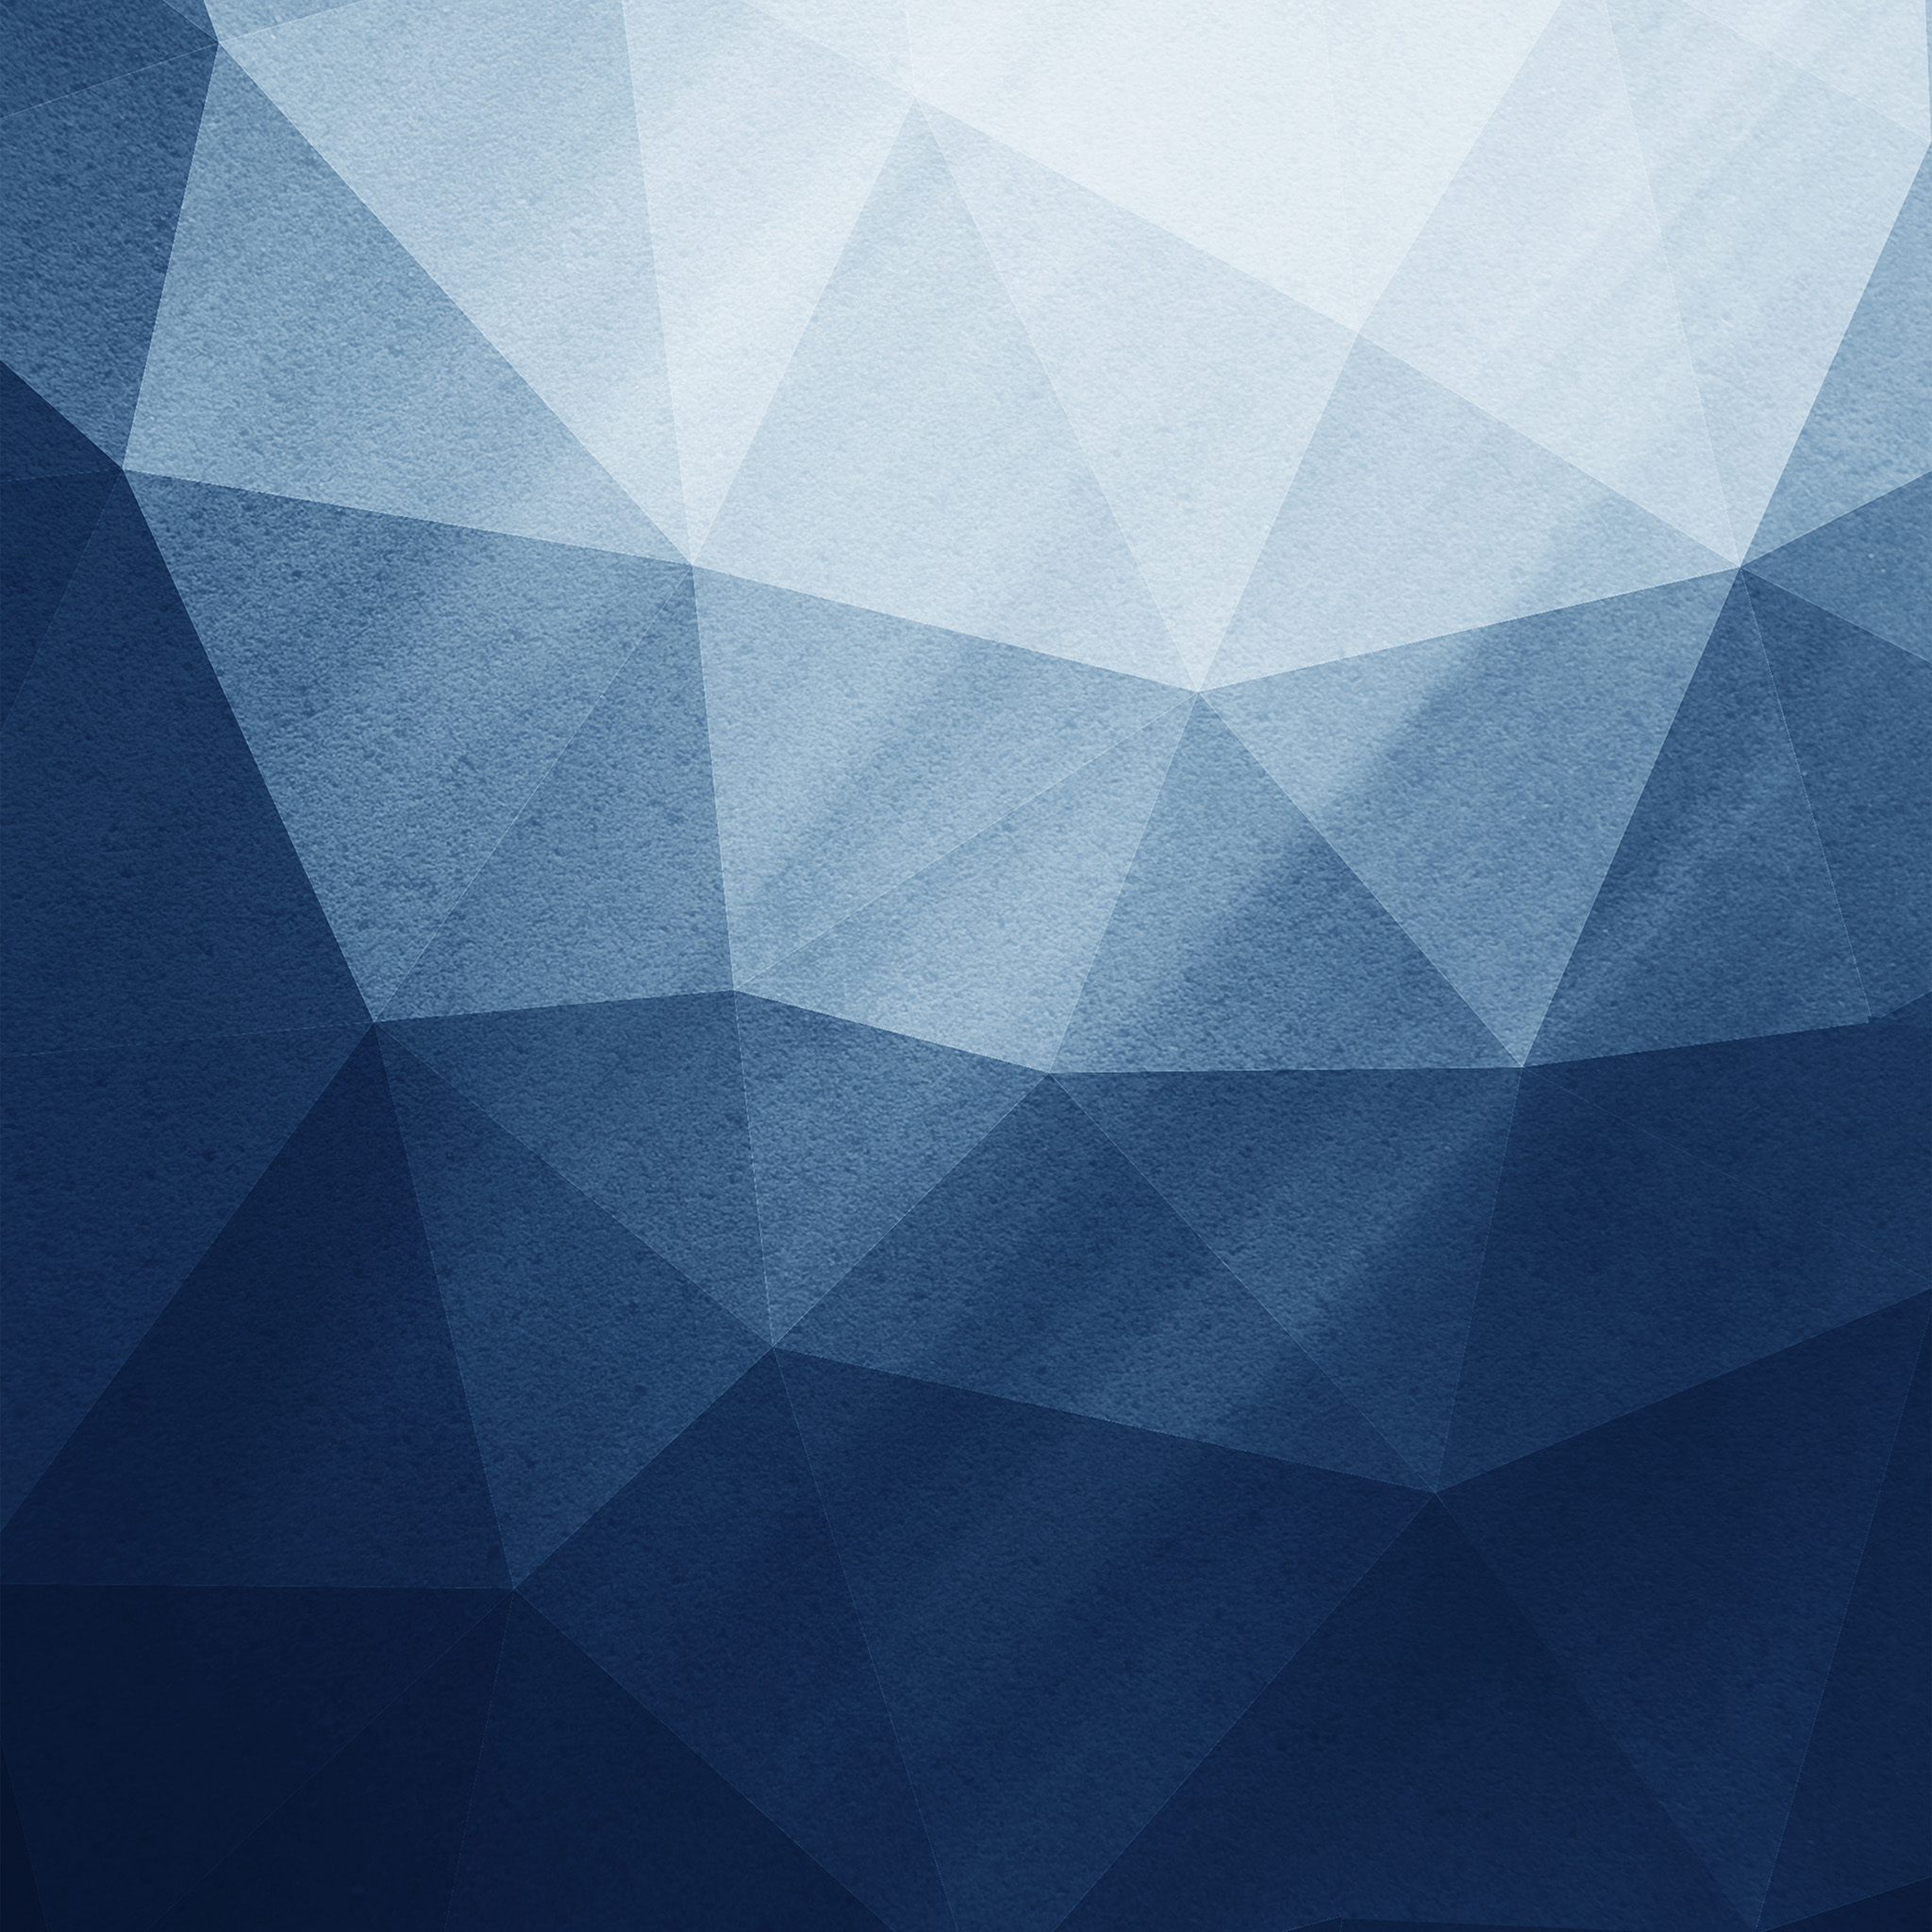 vz49-polygon-blue-texture-abstract-pattern-background-wallpaper